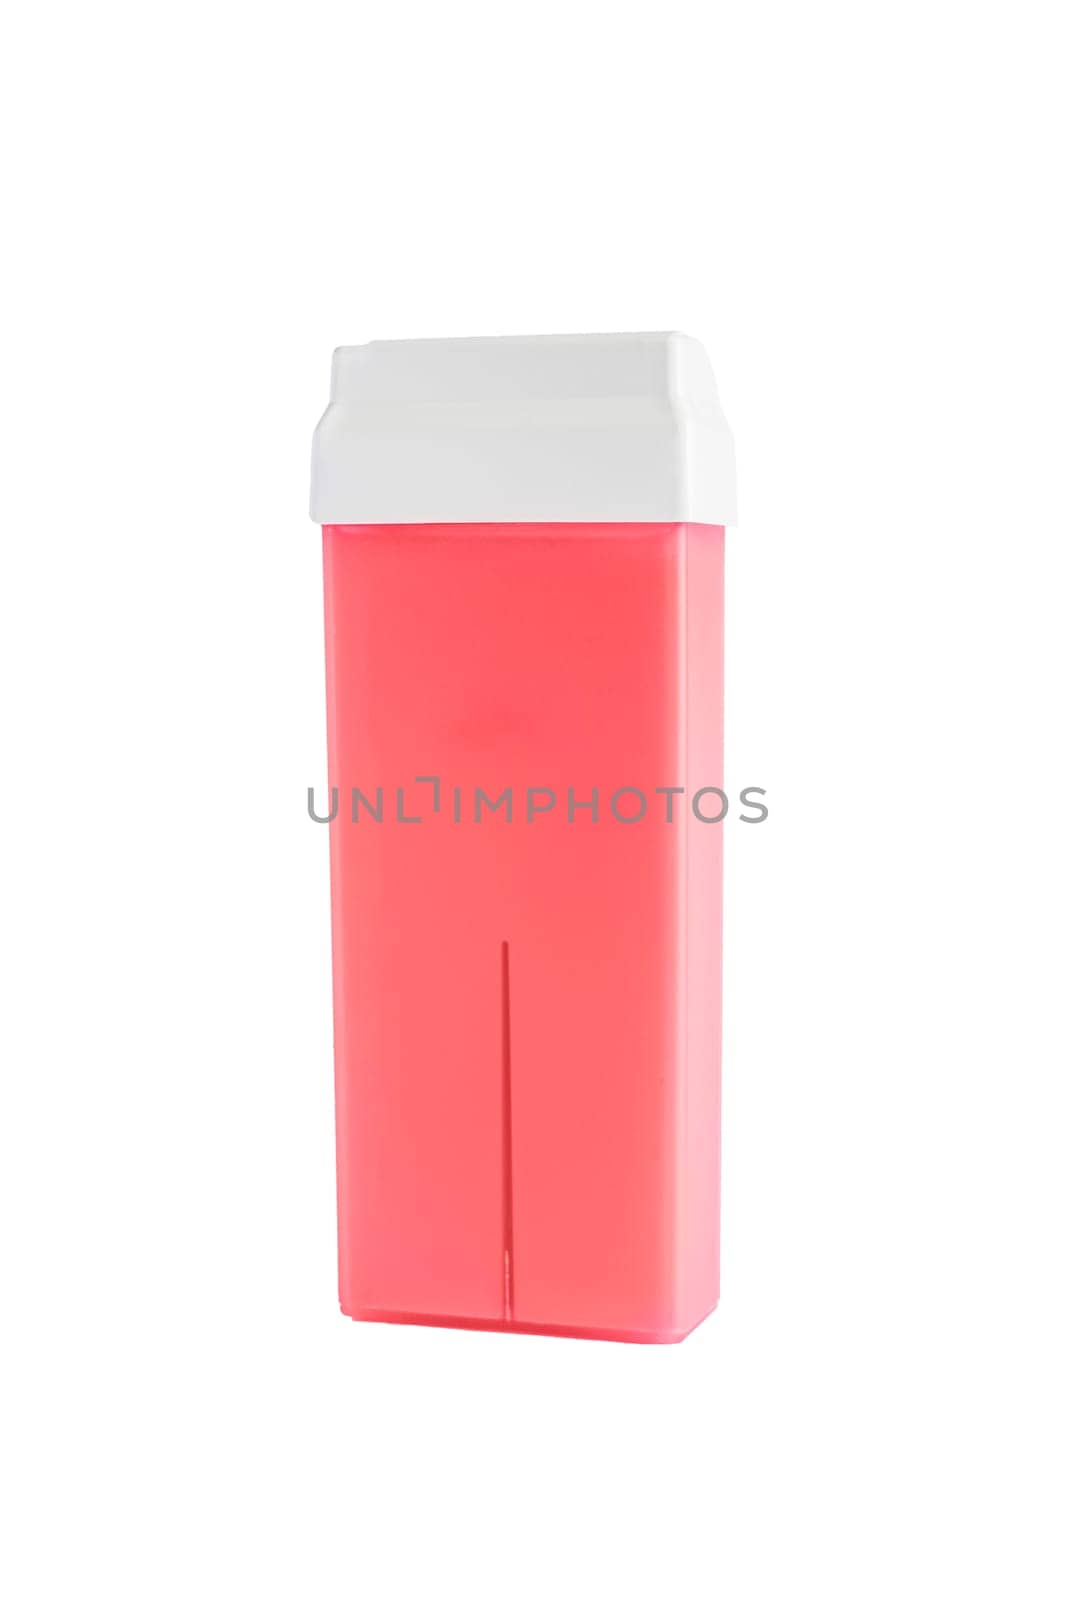 cartridges with pink wax for depilation on white background